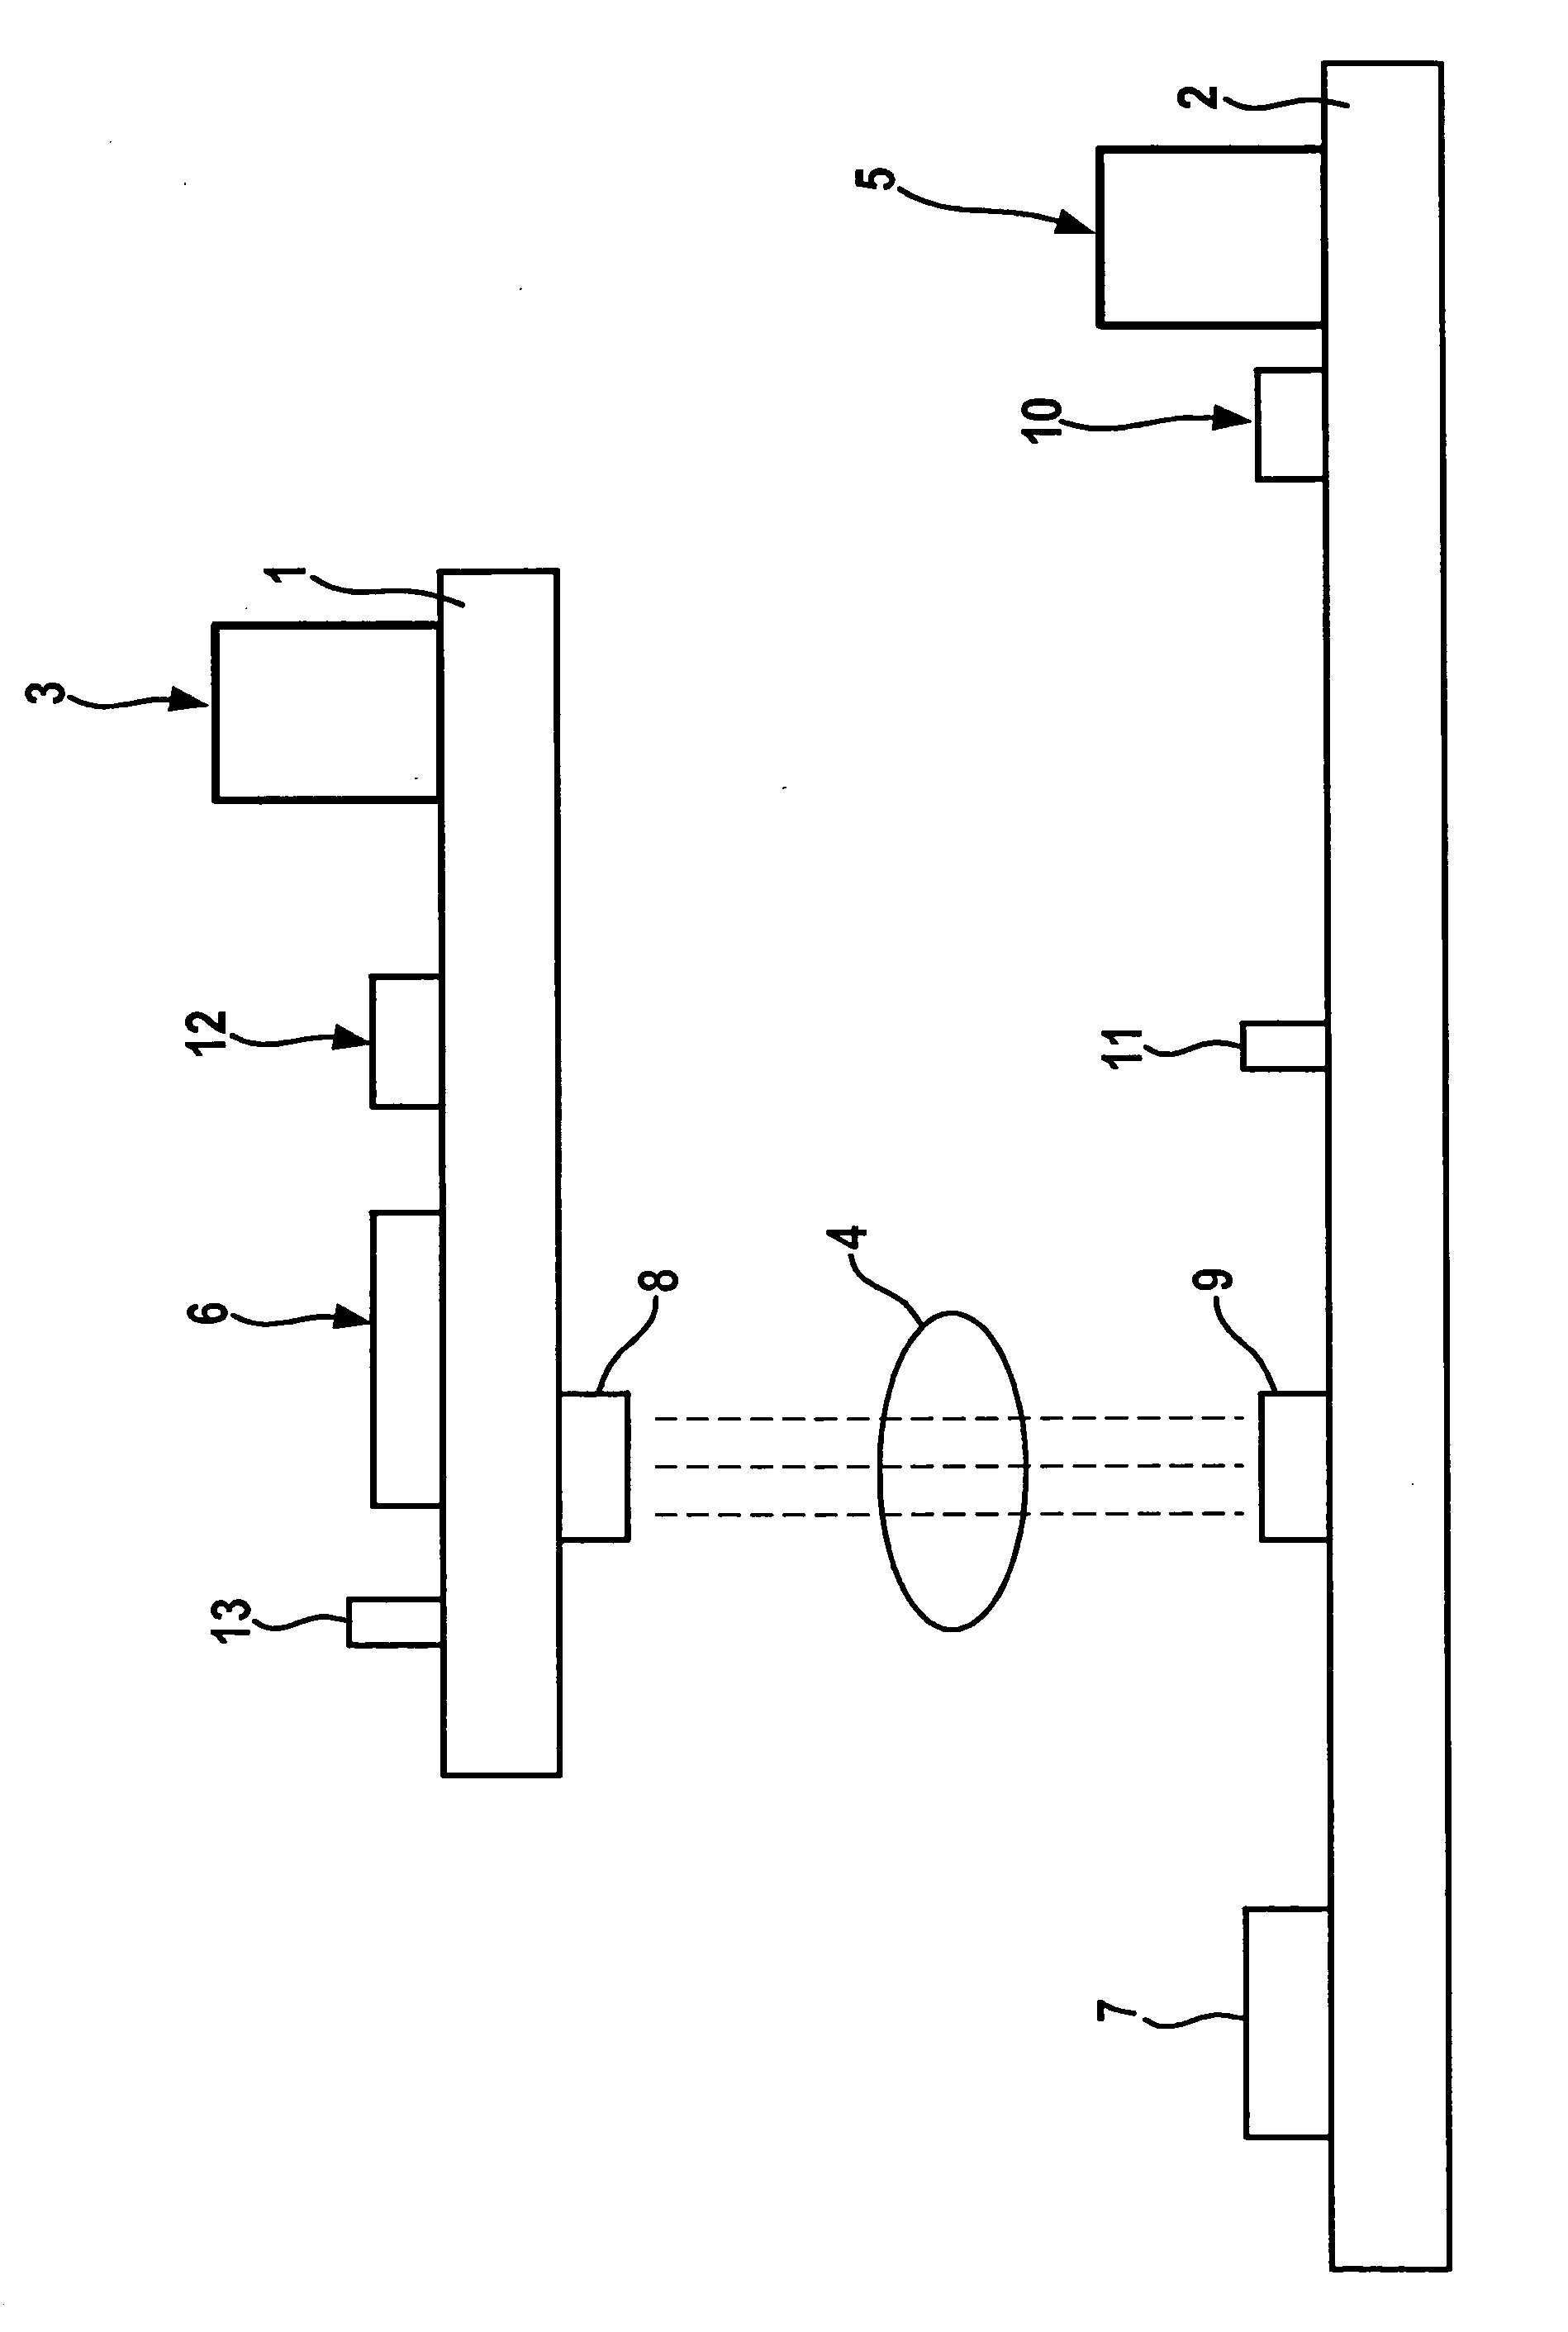 Control unit having a device for optical data transmission